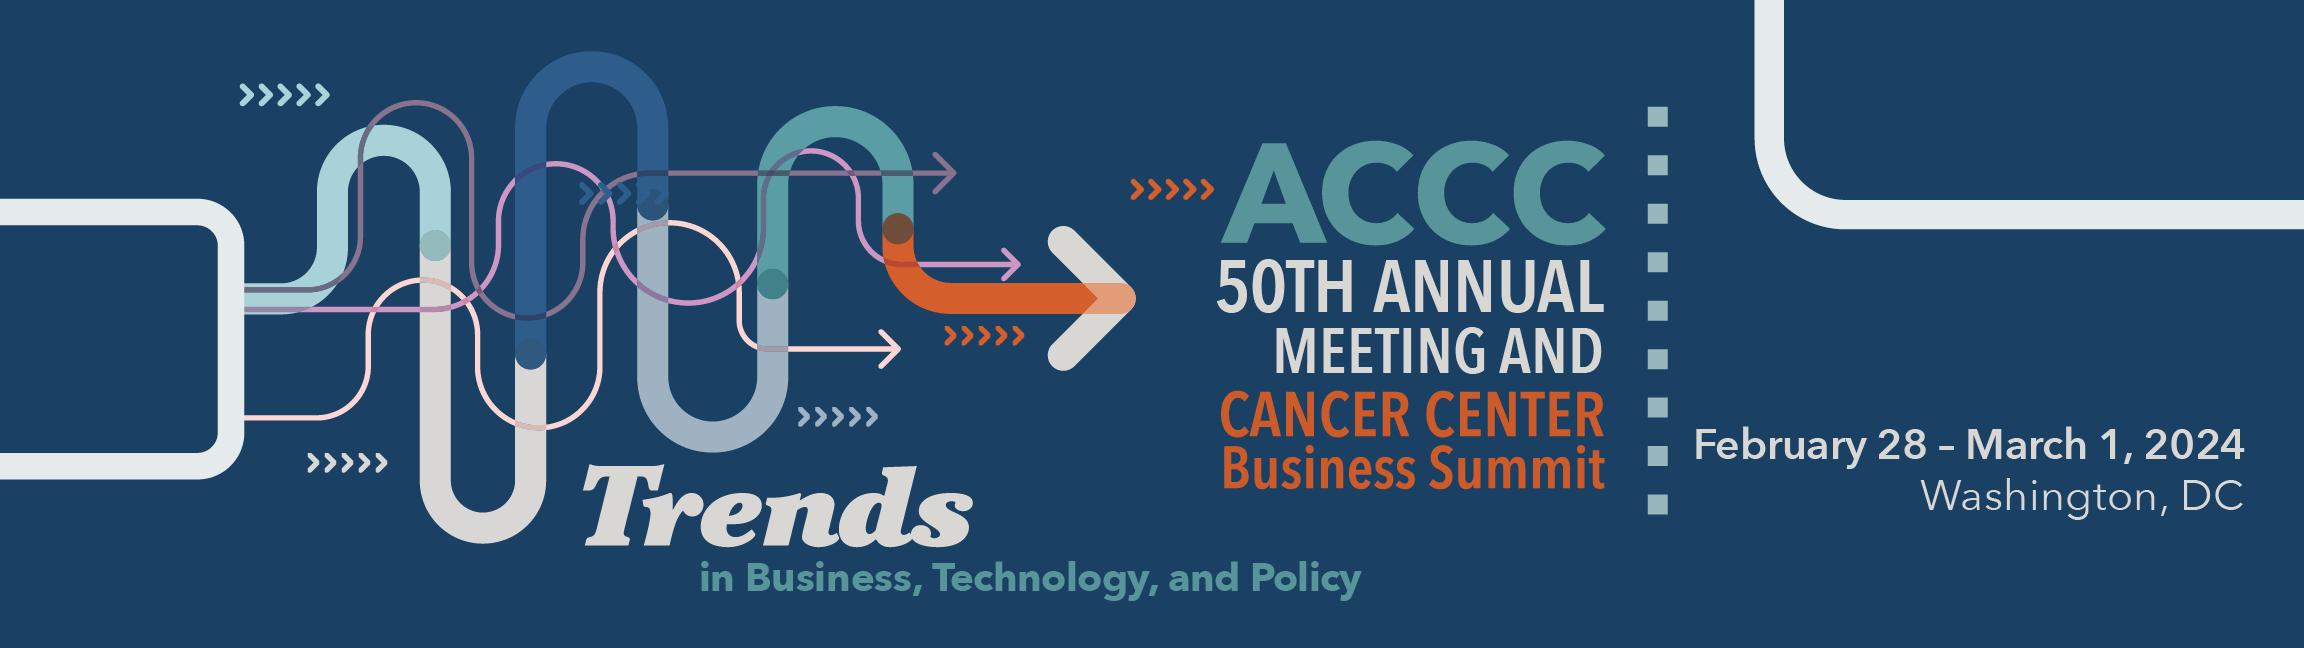 ACCC 50th Annual Meeting & Cancer Center Business Summit